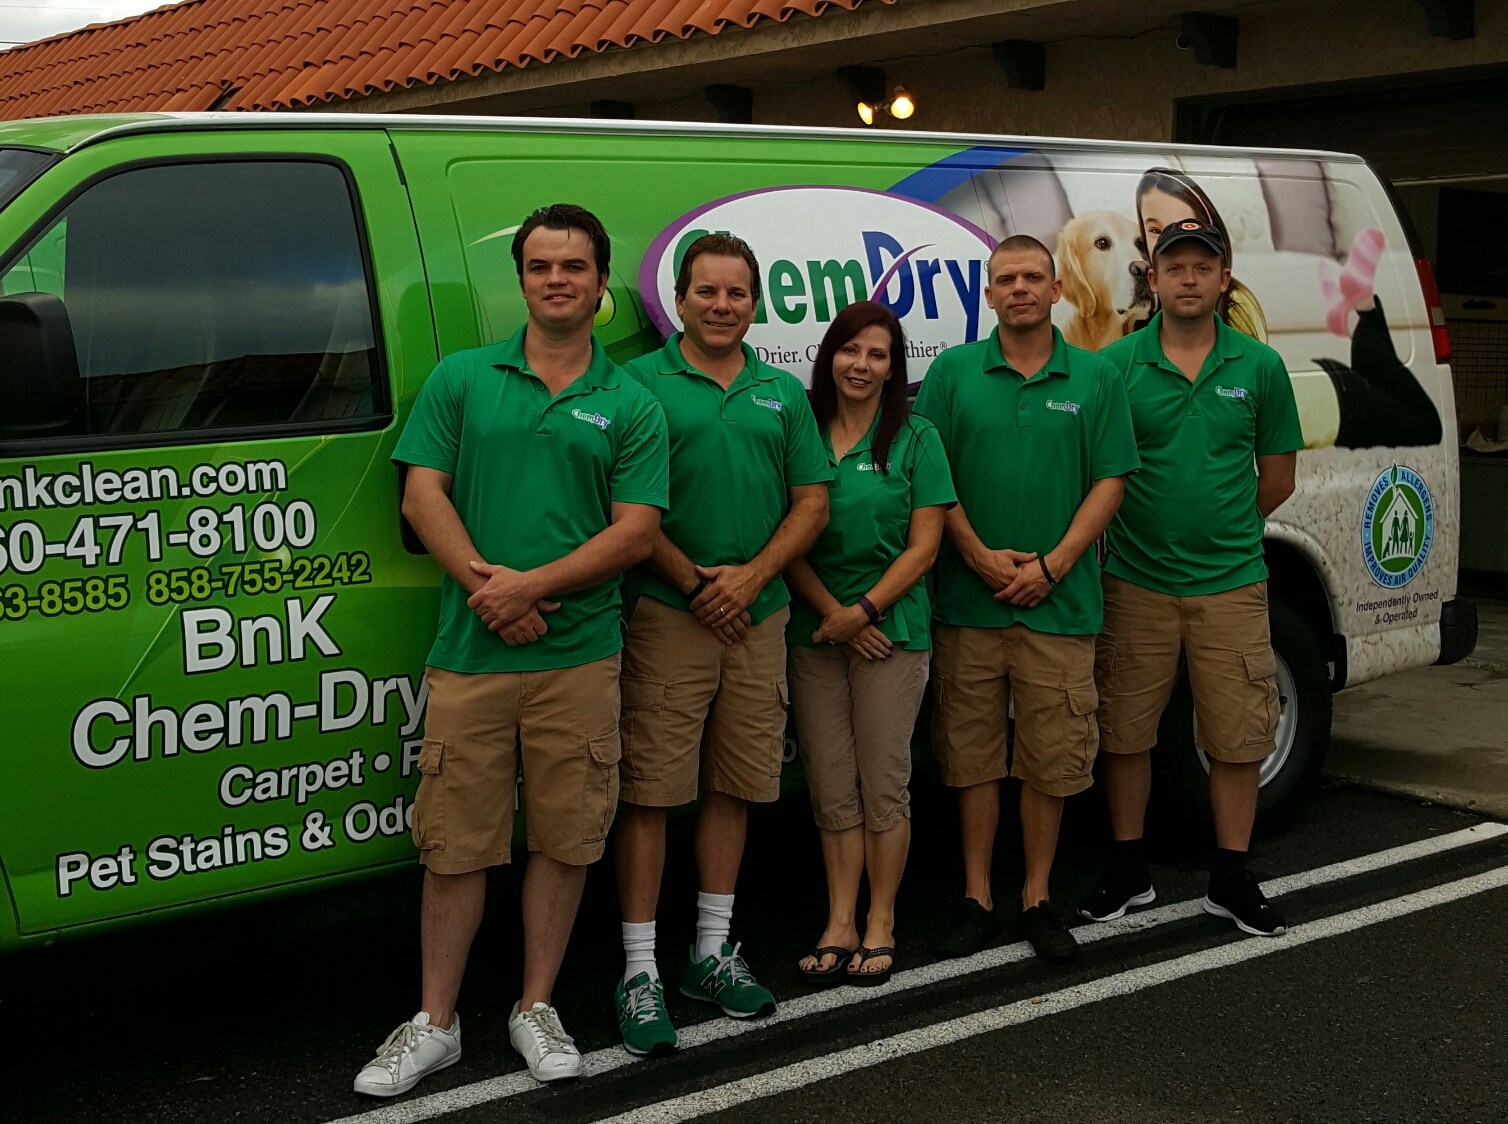 BNK Chem-Dry - Upholstery Cleaning Team Members